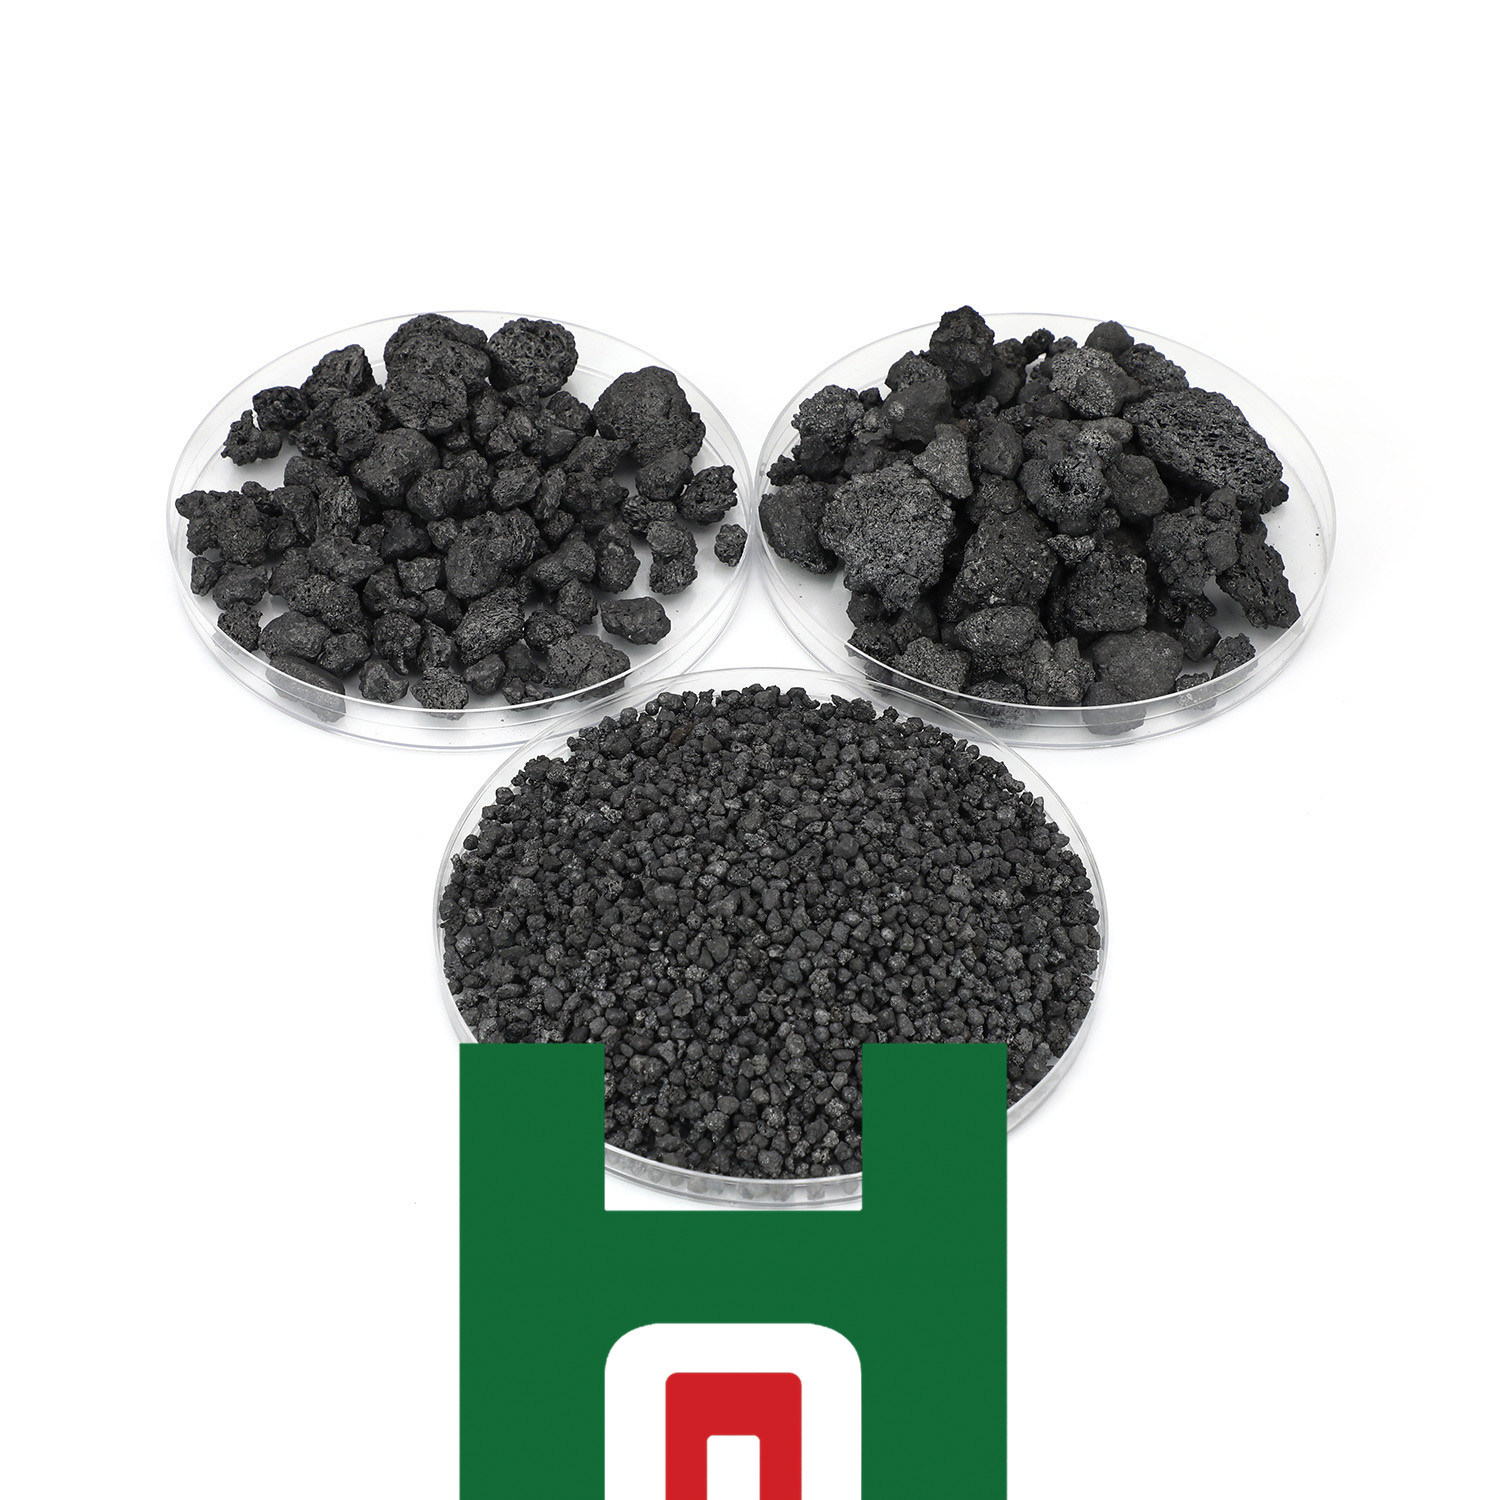 carbon additive calcined anthracite coal for steelmaking price